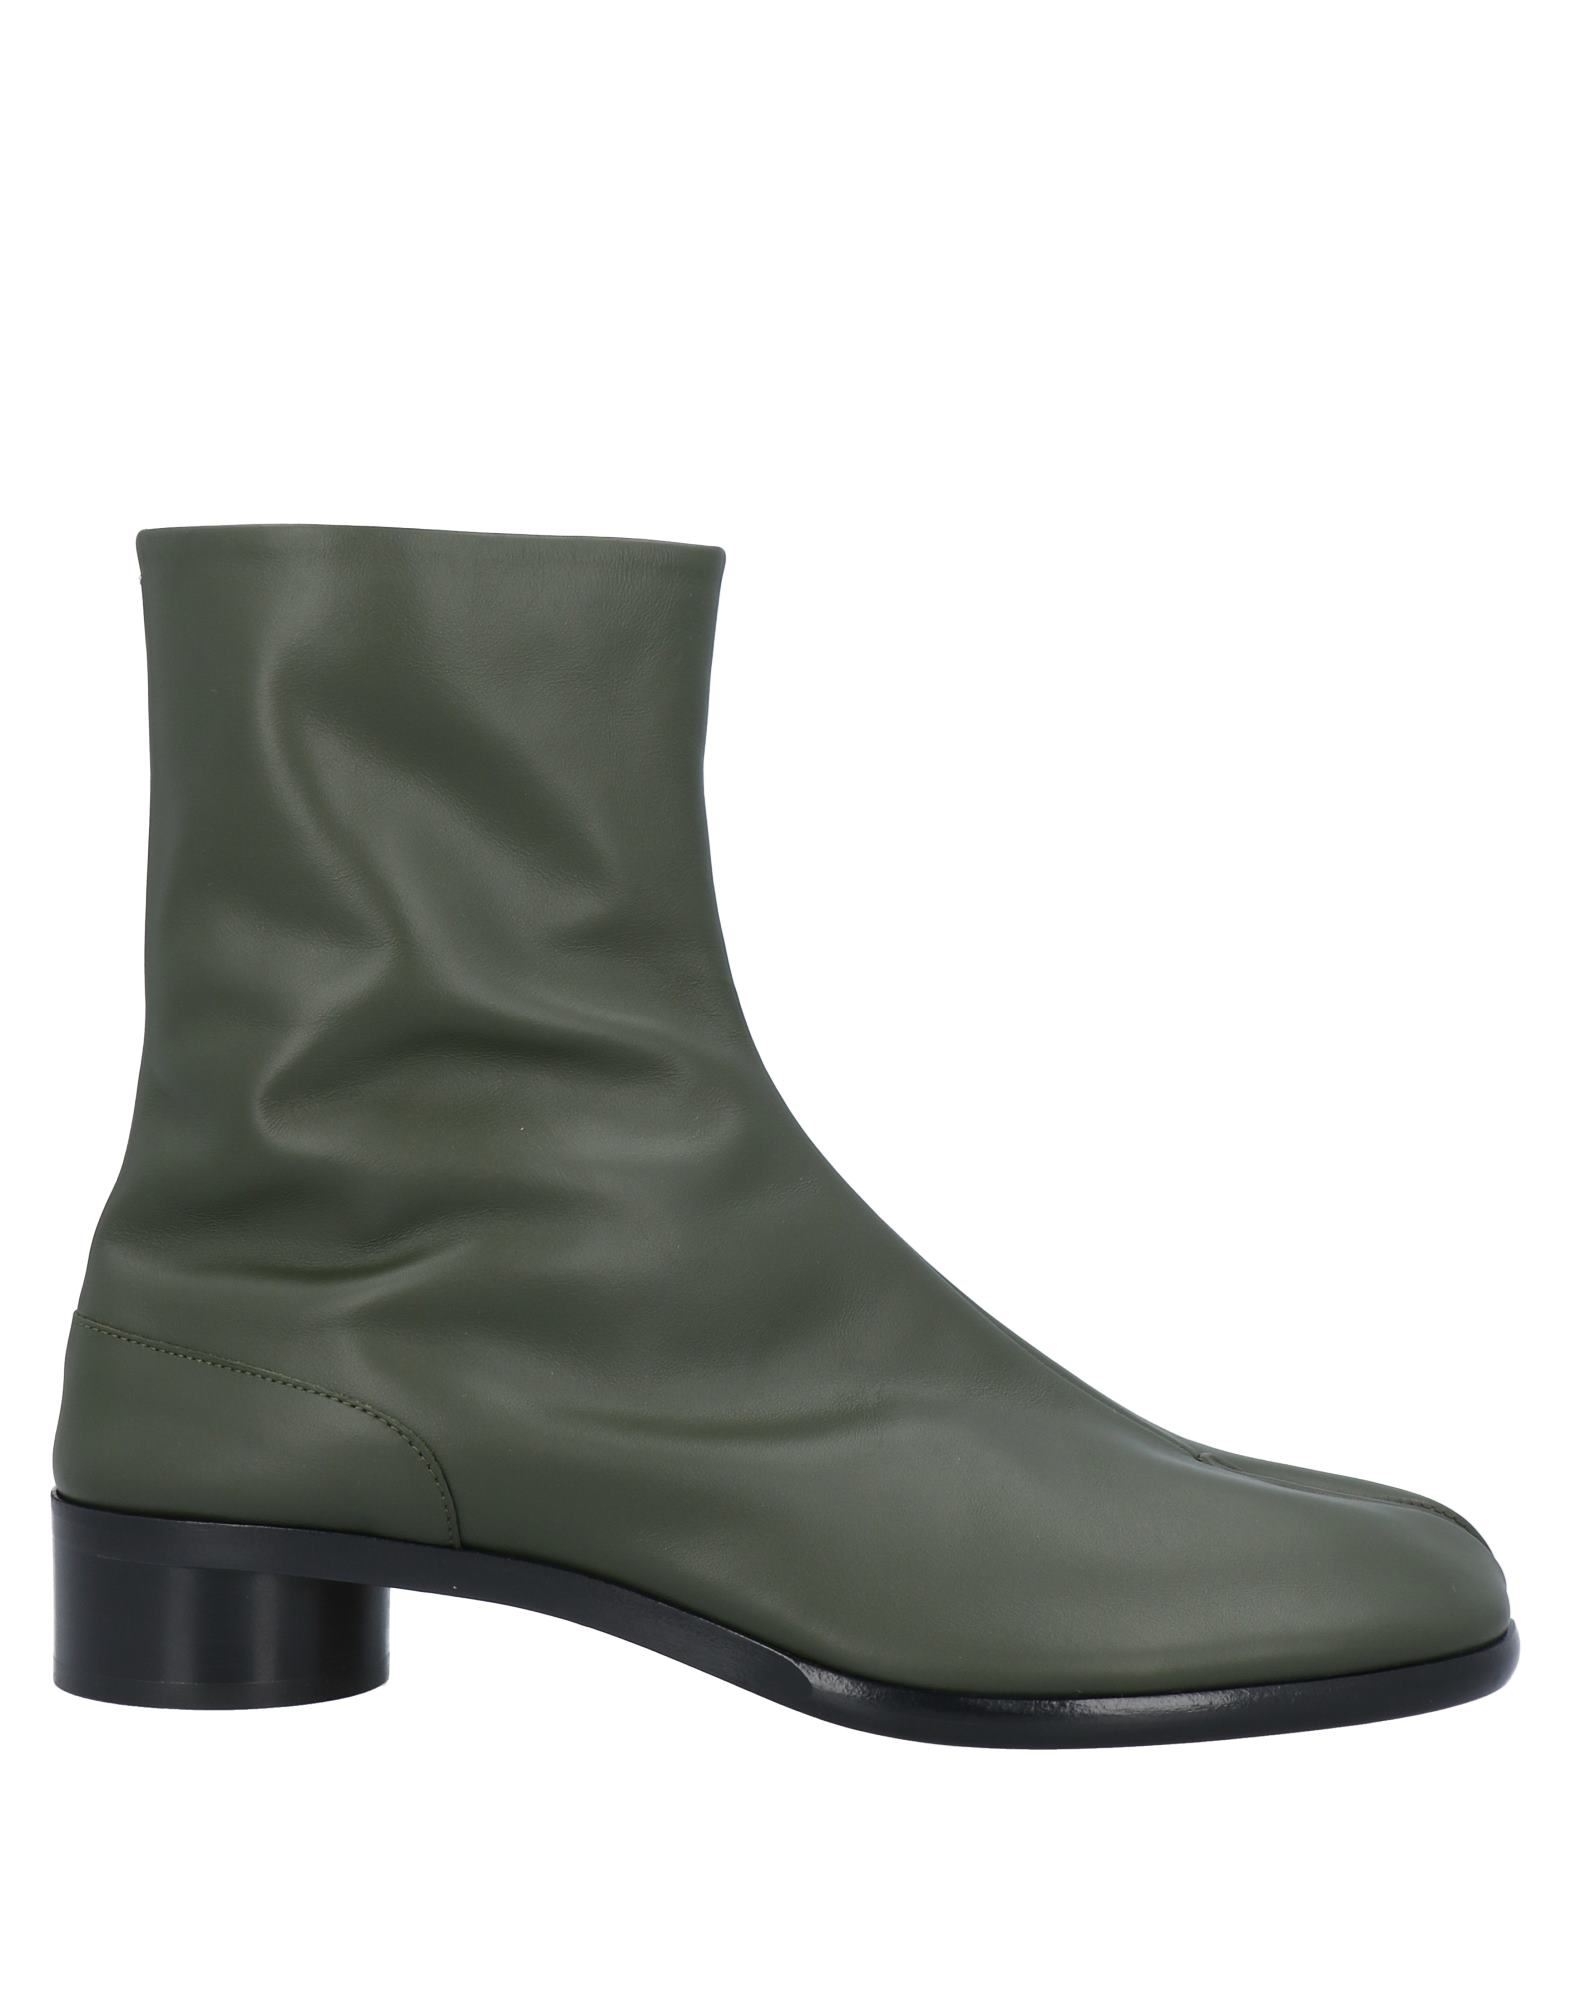 Maison Margiela Ankle Boots In Military Green